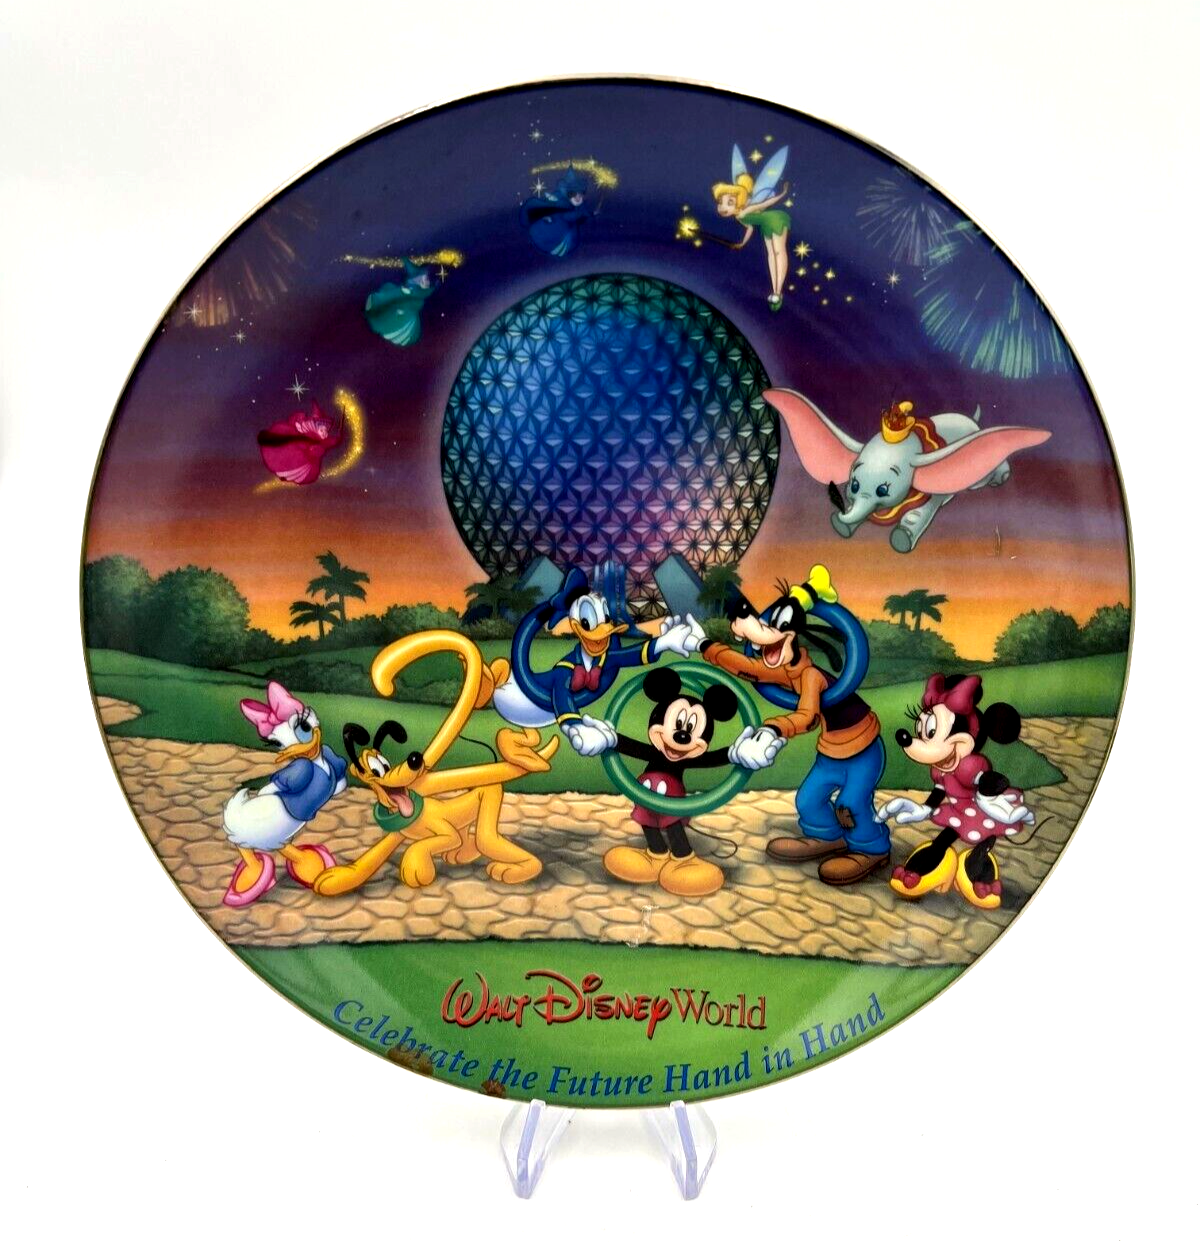 Walt Disney World Collector Plate 2000  Celebrate the Future Hand in Hand - $24.99